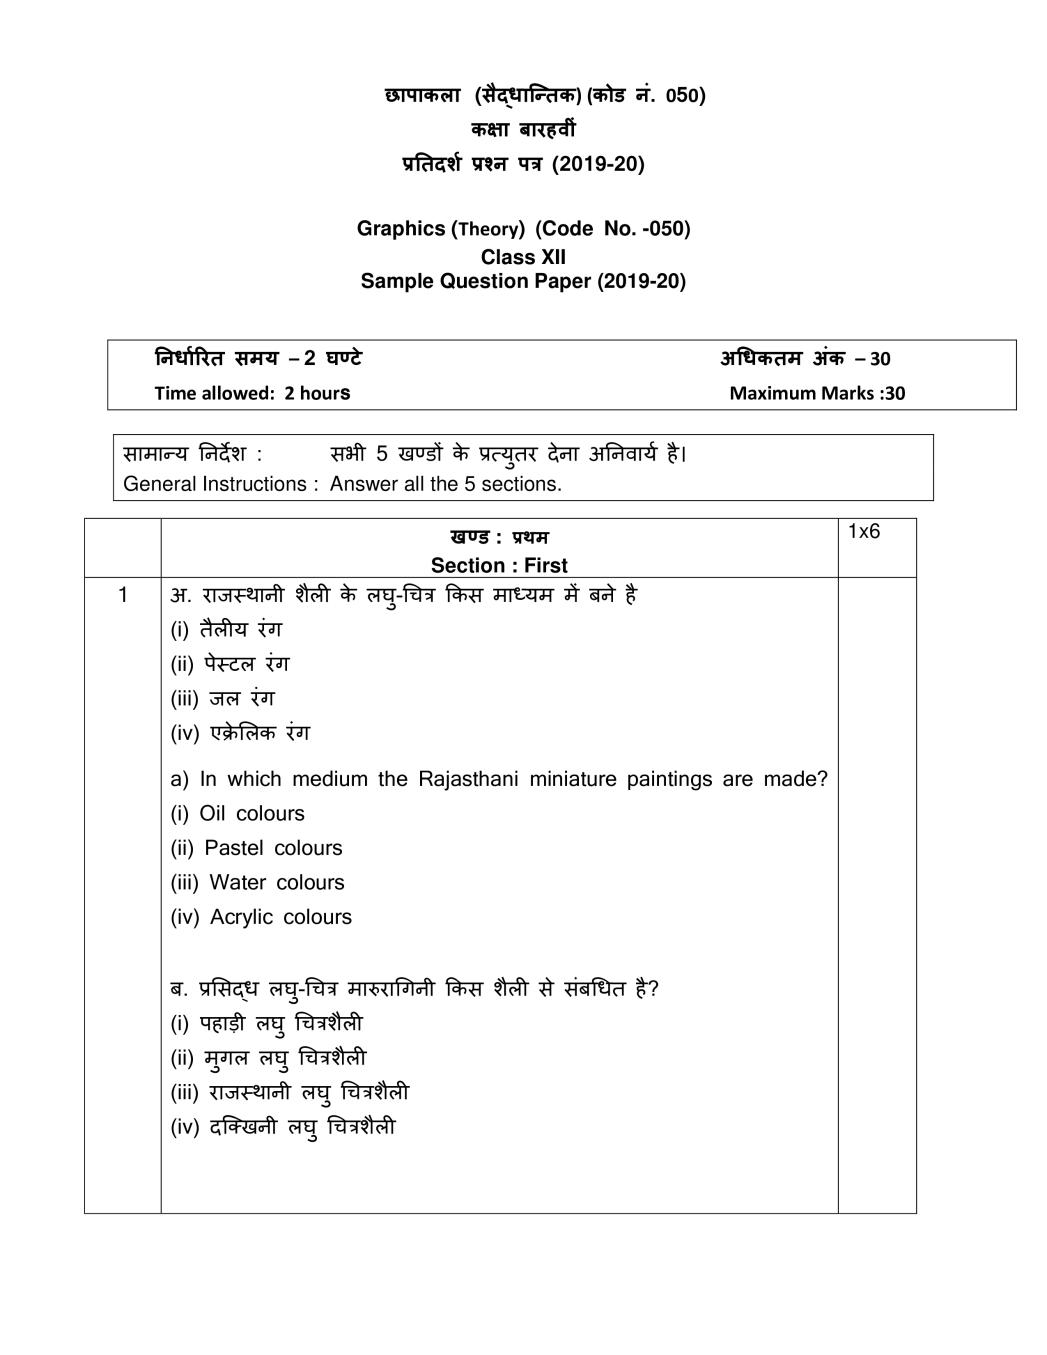 CBSE Class 12 Sample Paper 2020 for Graphic - Page 1